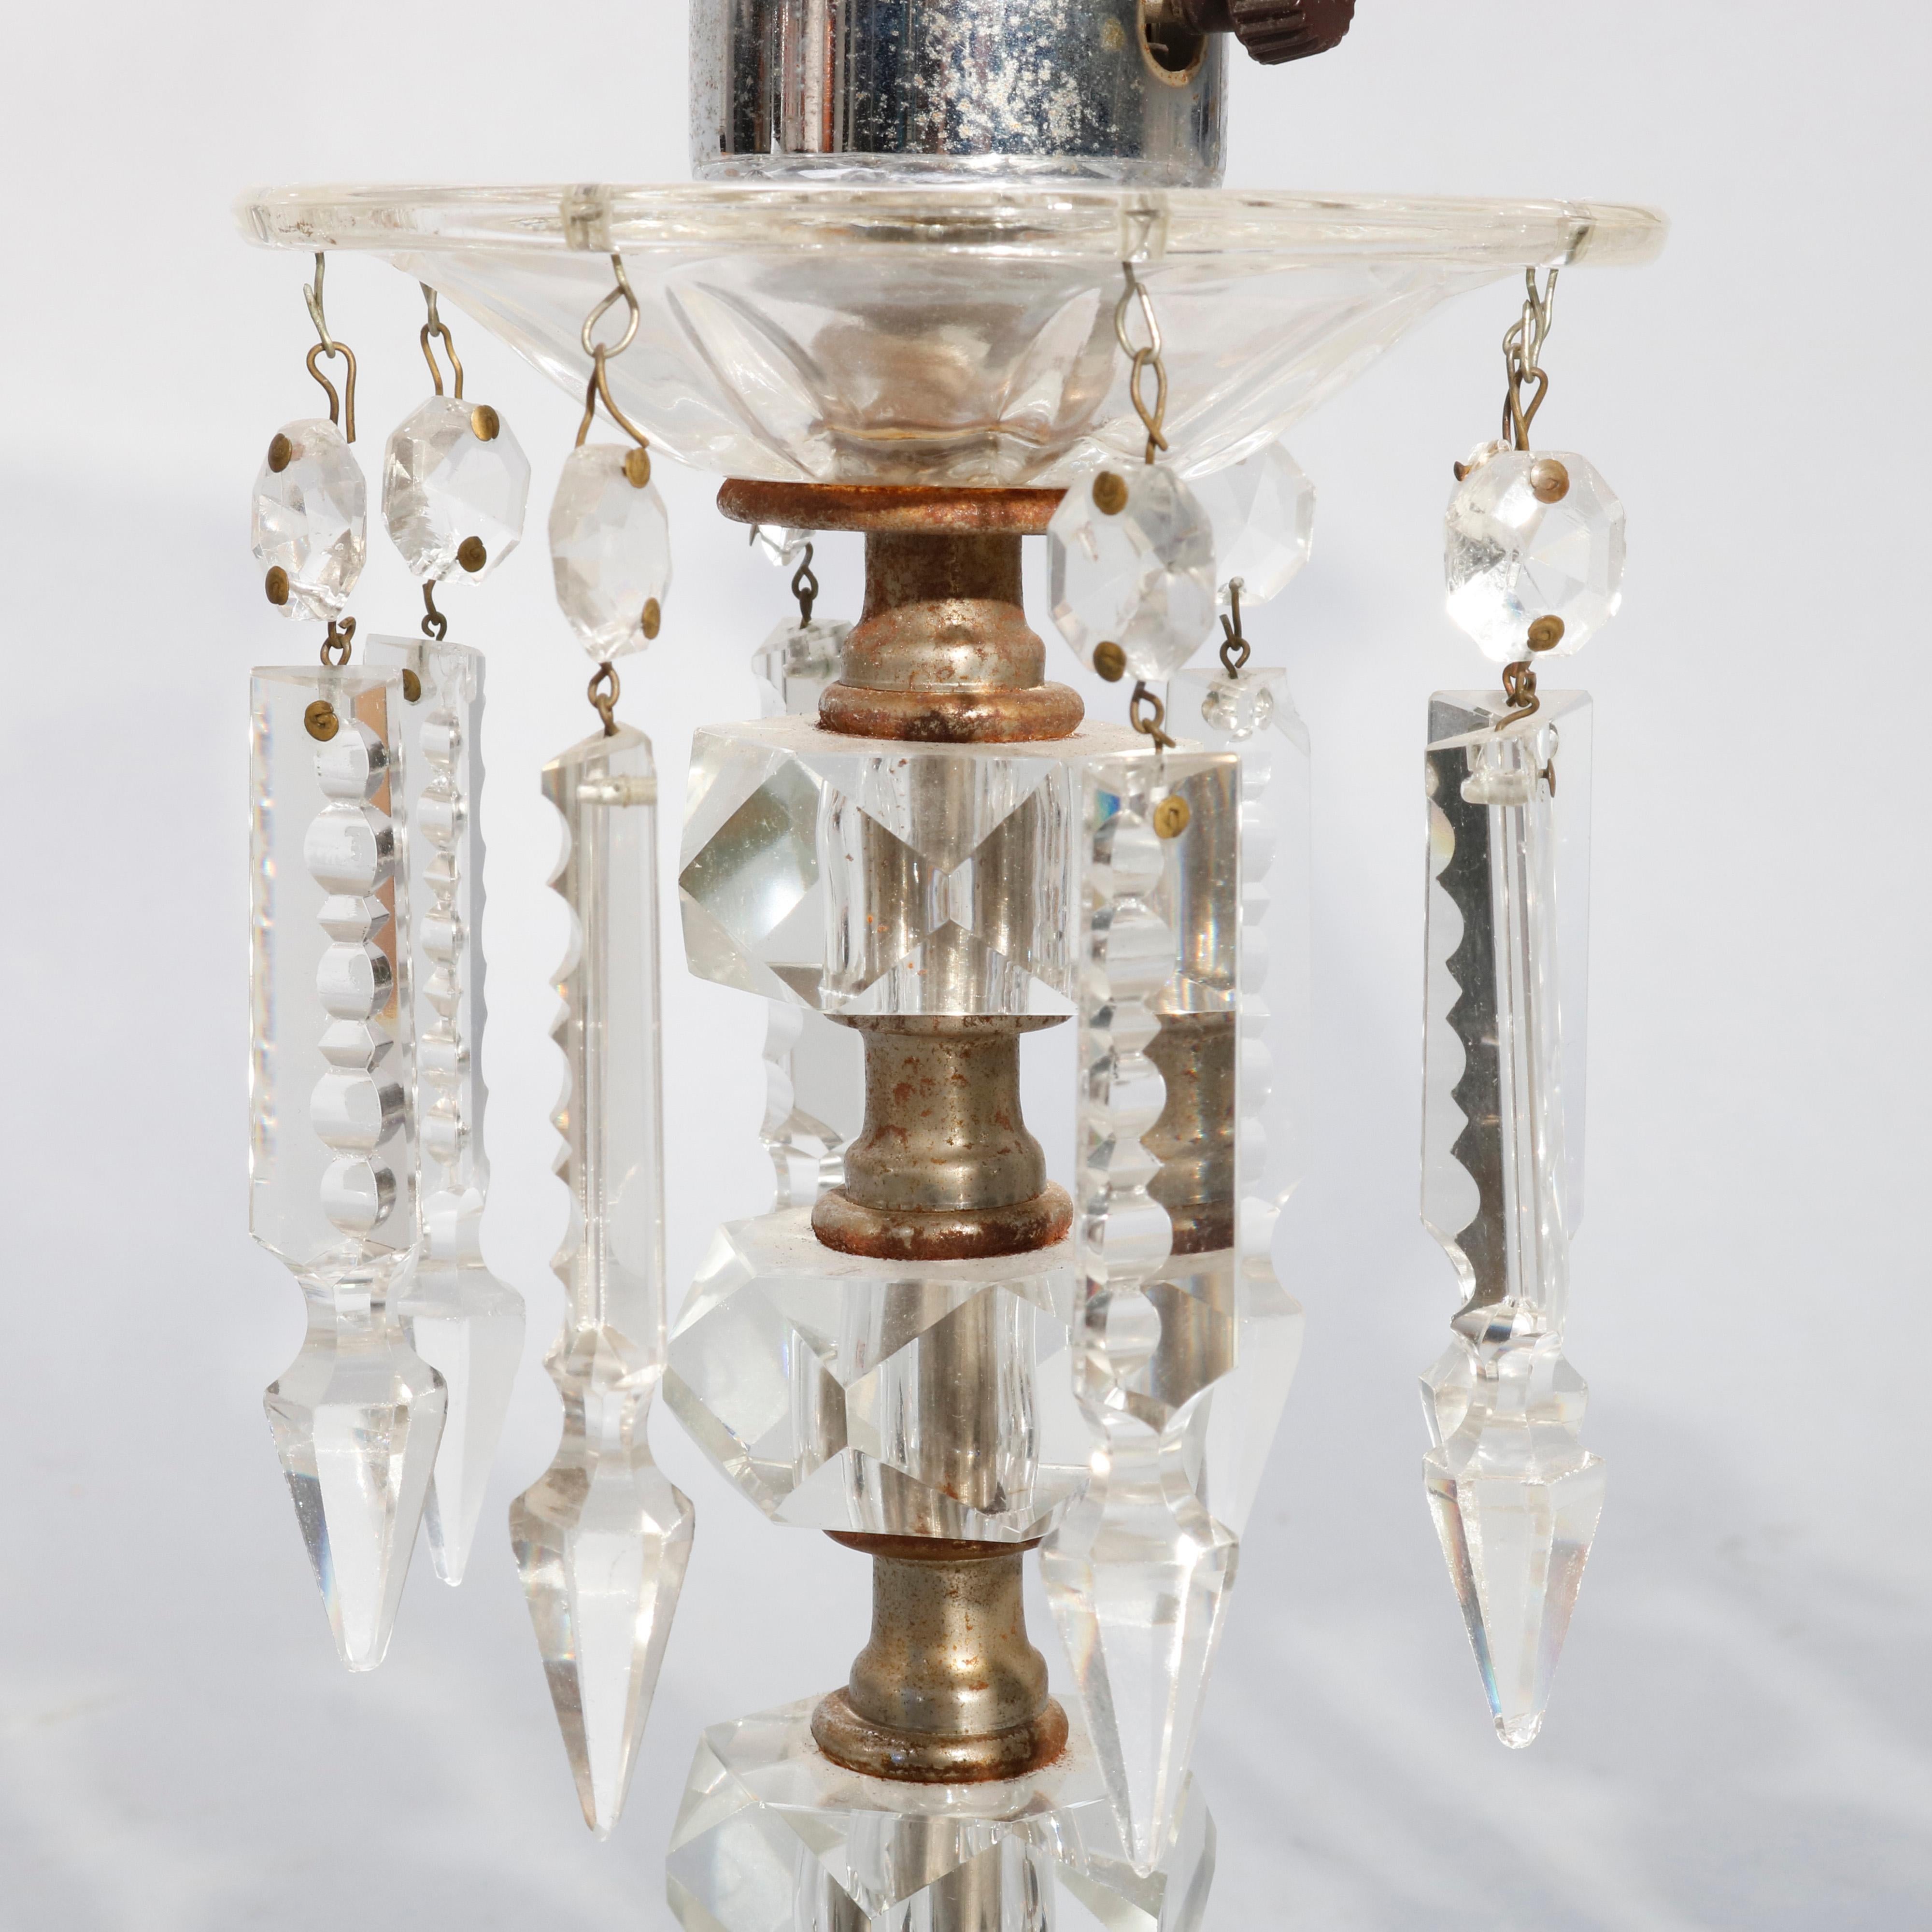 An antique pair of candelabra table lamps offer crystal balustrade form with hanging cut crystal highlights, electrified, circa 1930

Measures - 16.25